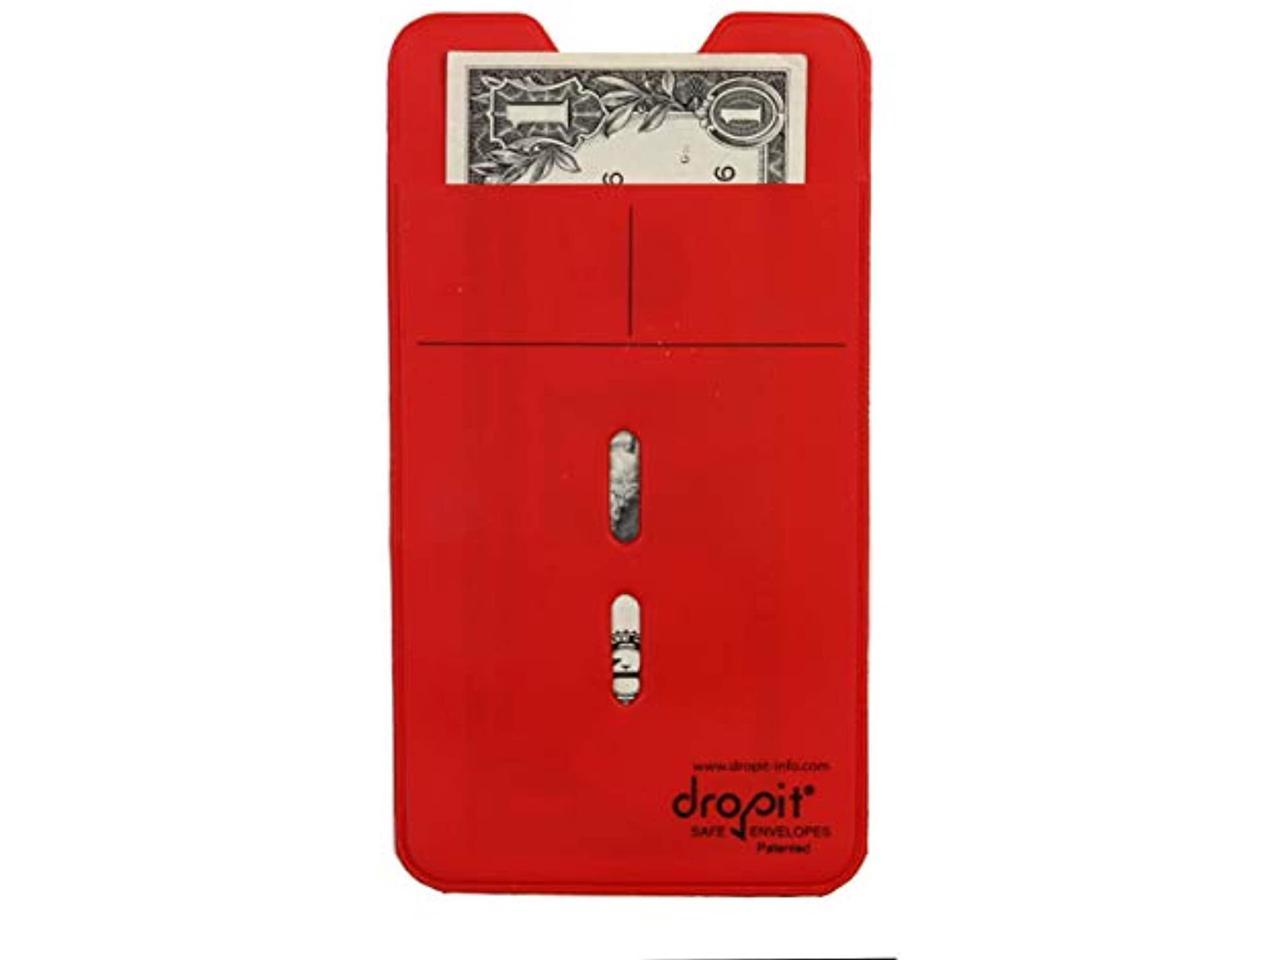 Reuseable Dropit Safe Re-usable Envelope for Safe Depositing of Currency and Money Blue, 1 Currency and Other Documents Organize Coupon 